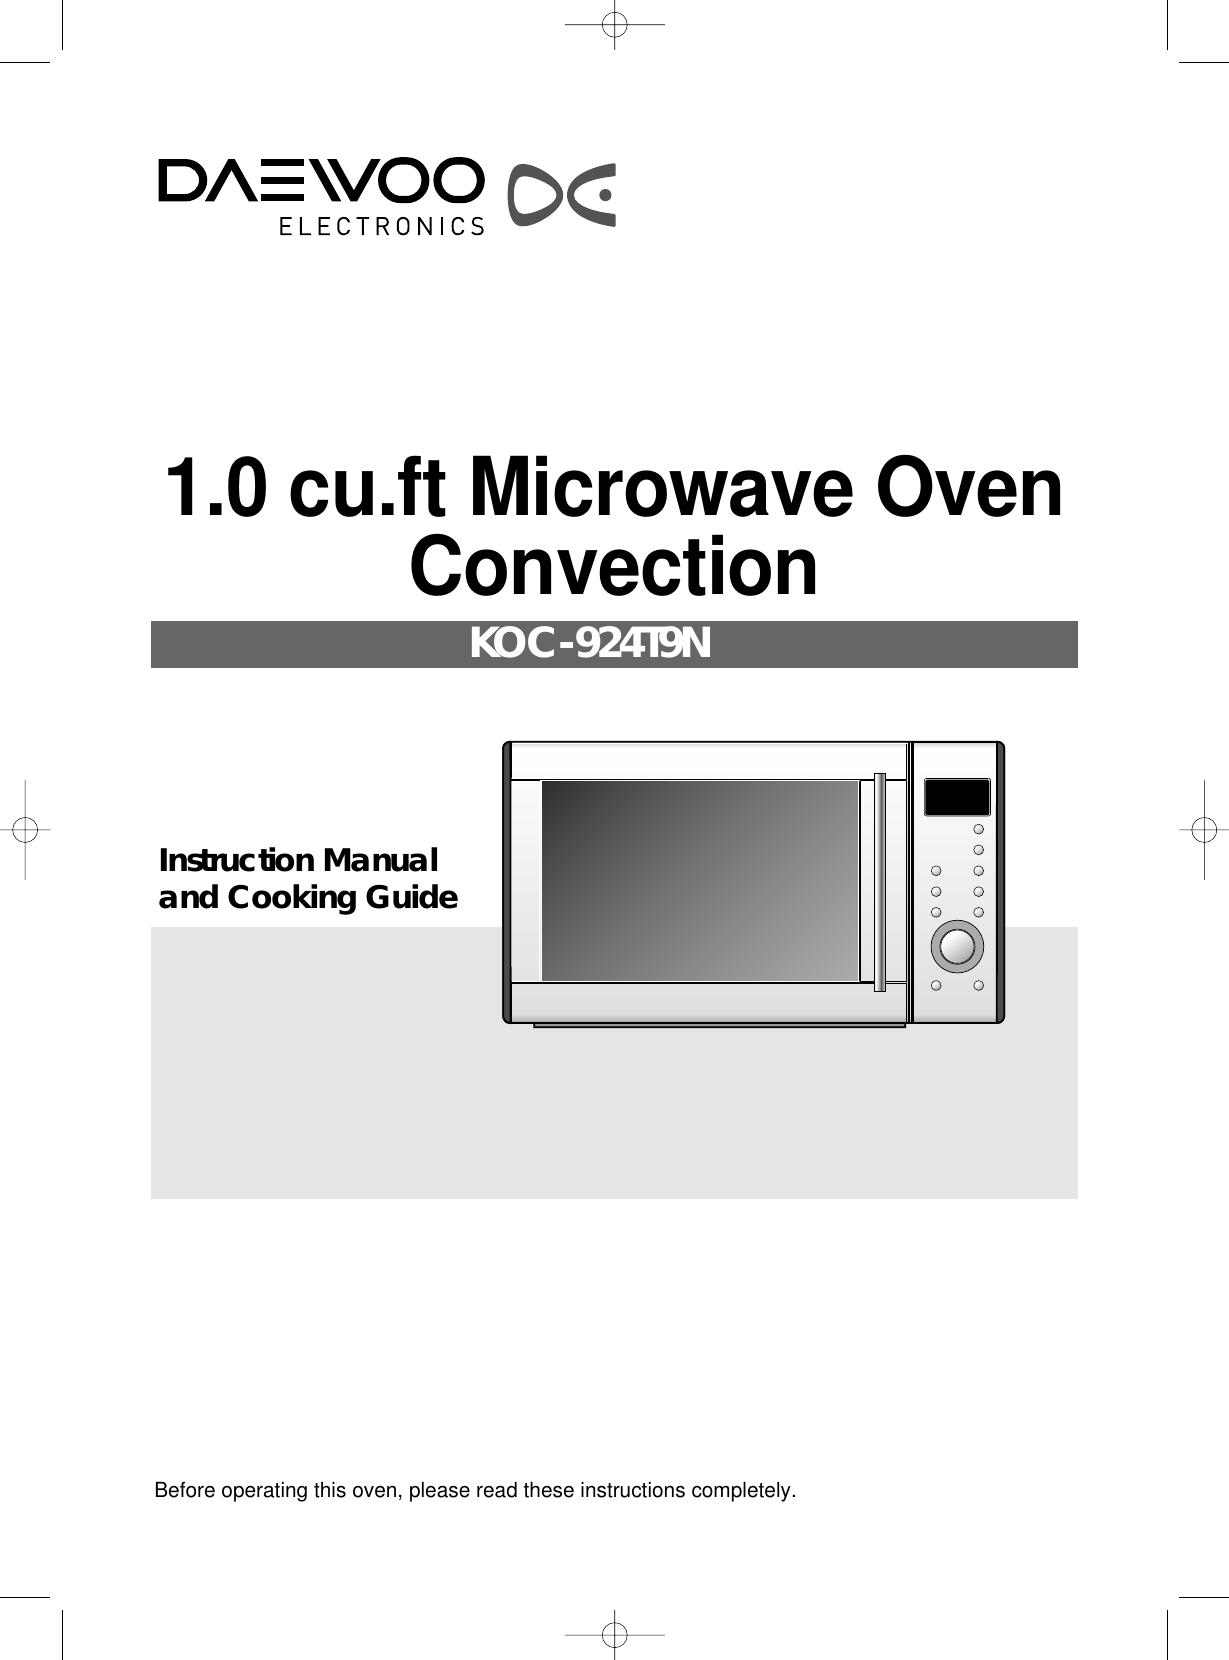 1.0 cu.ft Microwave OvenConvection            KOC-924T9NInstruction Manualand Cooking GuideBefore operating this oven, please read these instructions completely.